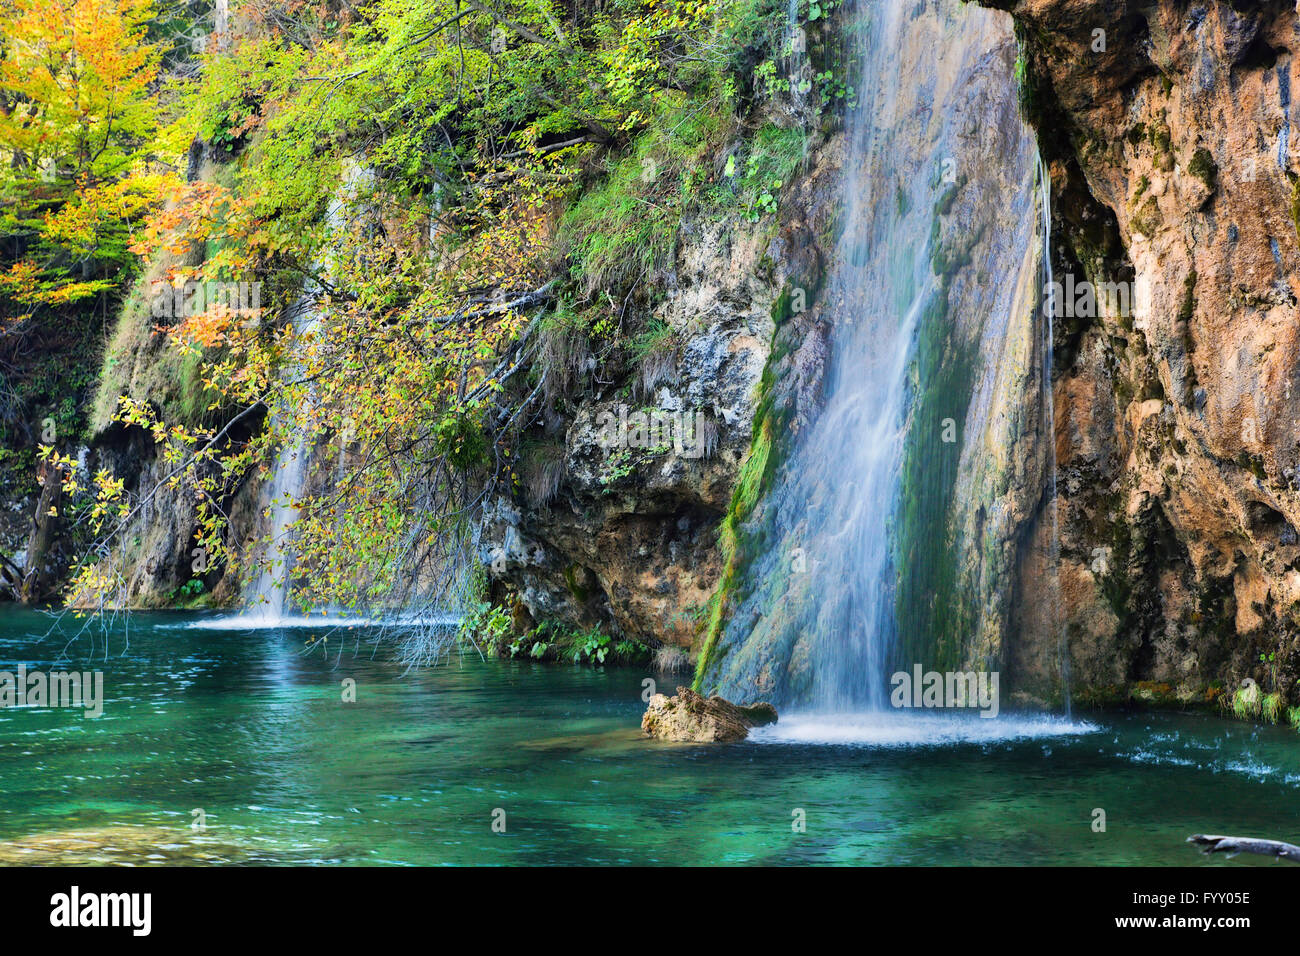 Waterfall in forest. Crystal clear water. Stock Photo